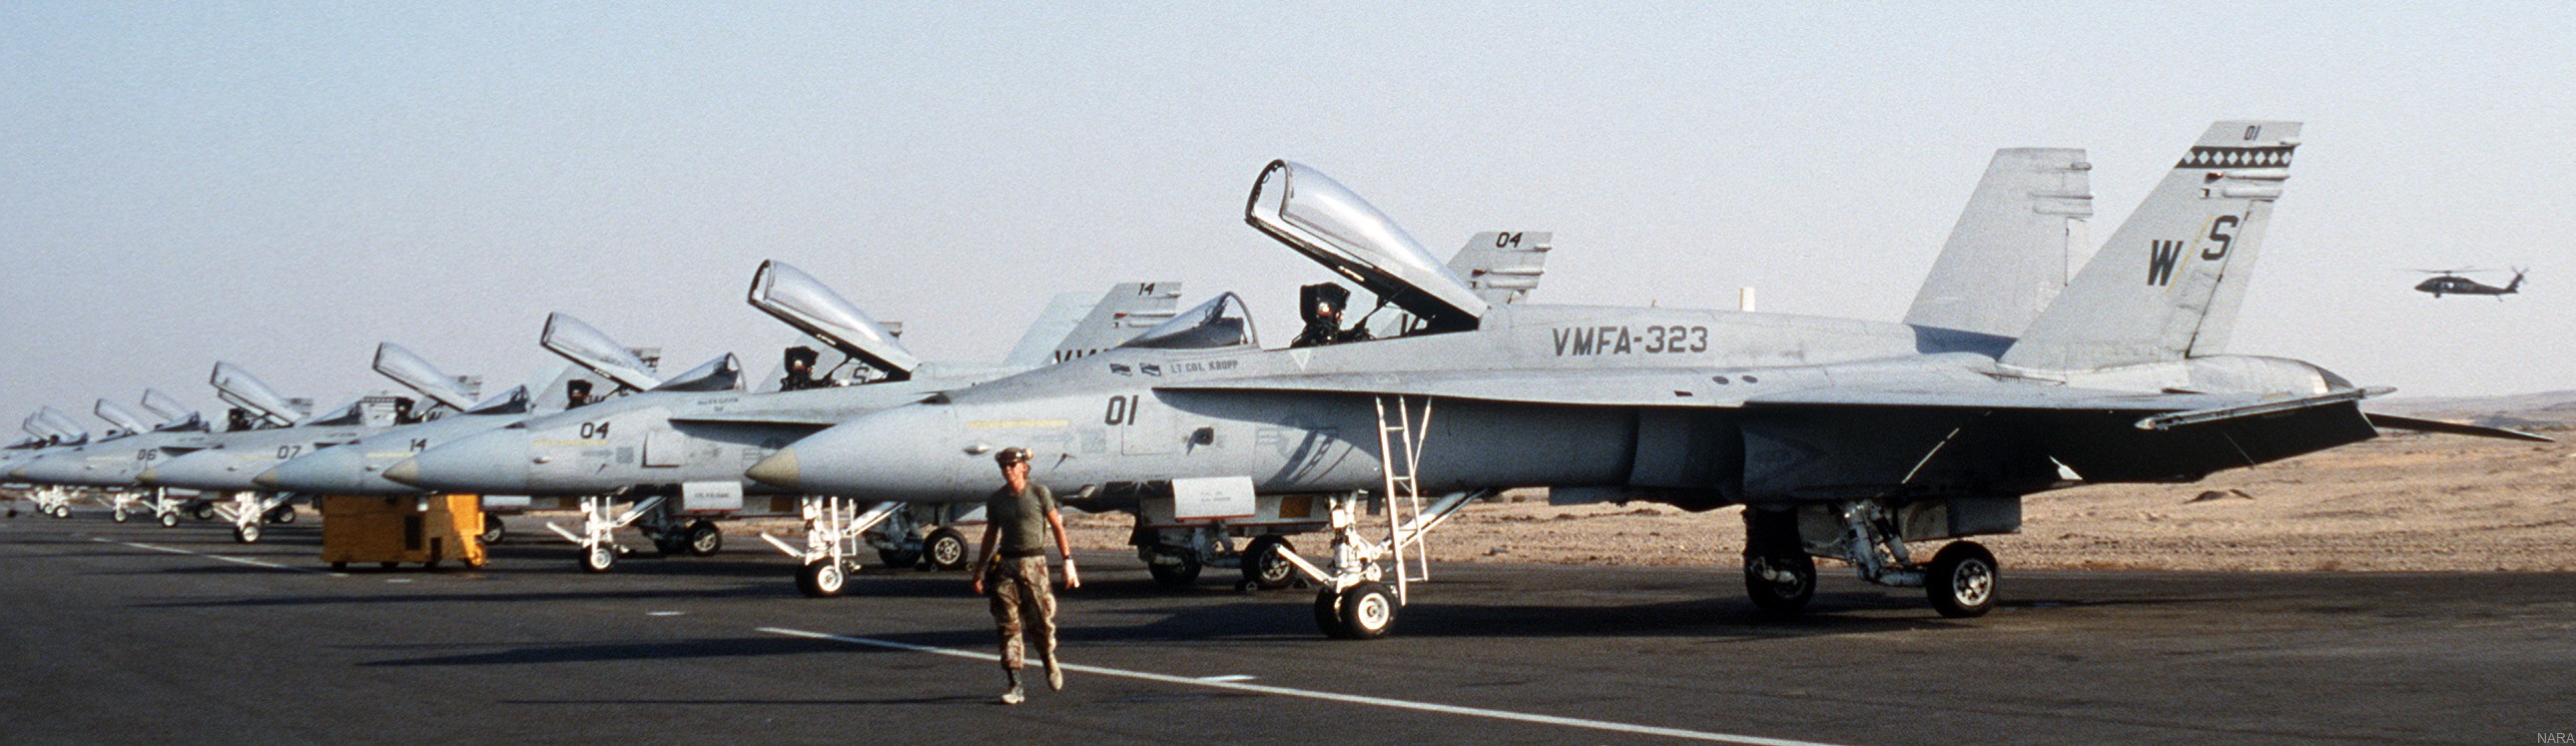 vmfa-323 death rattlers marine fighter attack squadron f/a-18a hornet 179 exercise bright star egypt 1987